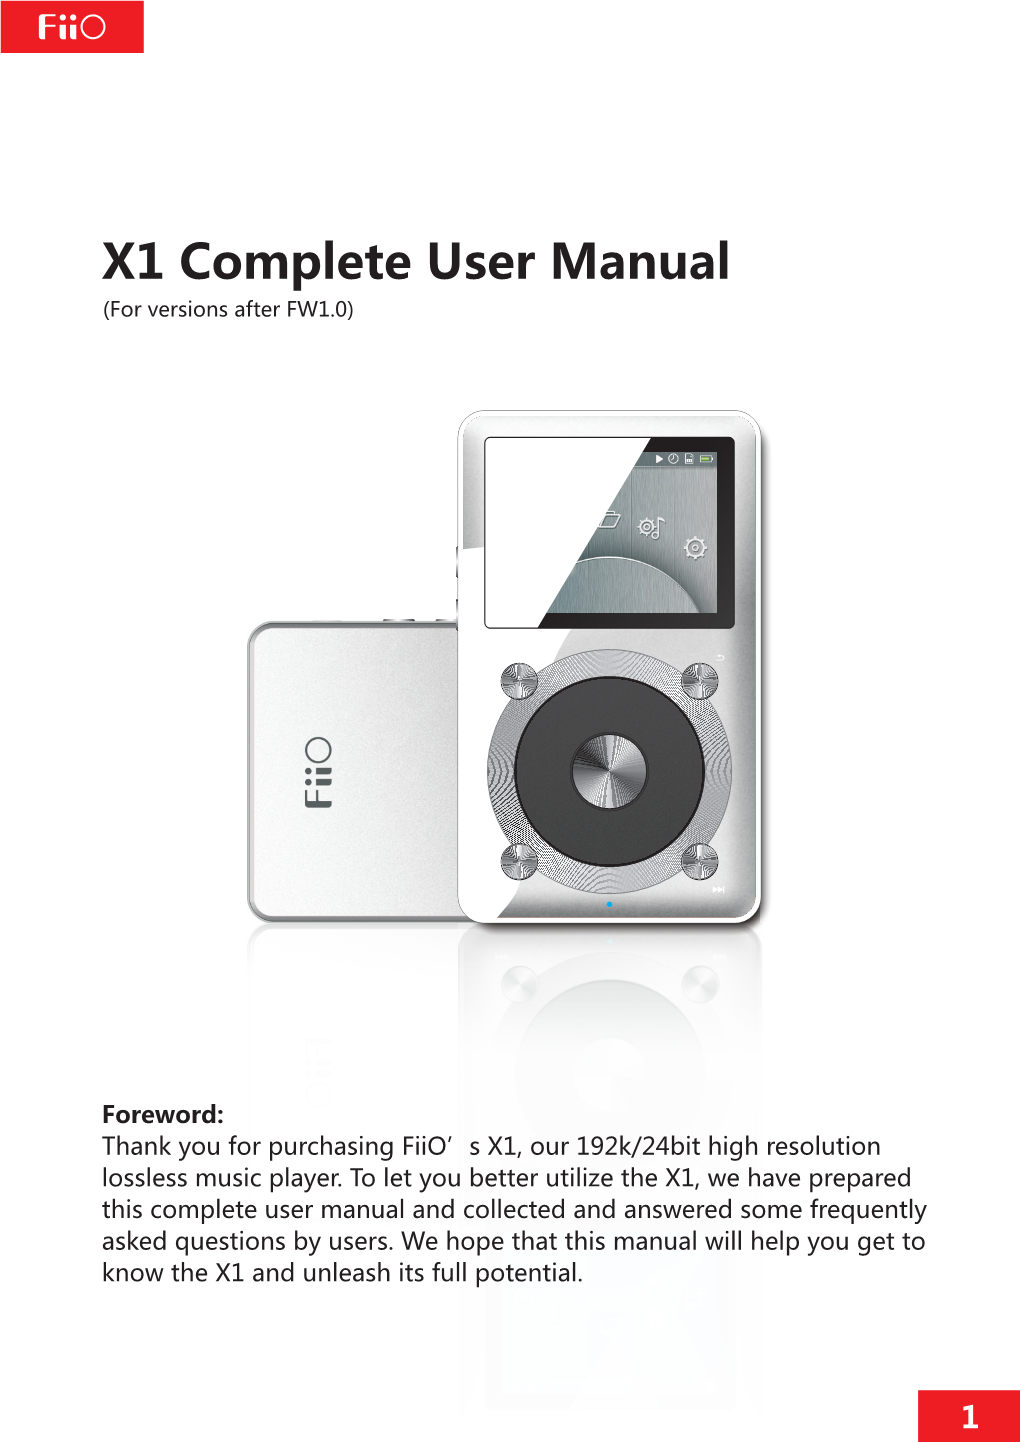 X1 Complete User Manual (For Versions After FW1.0)